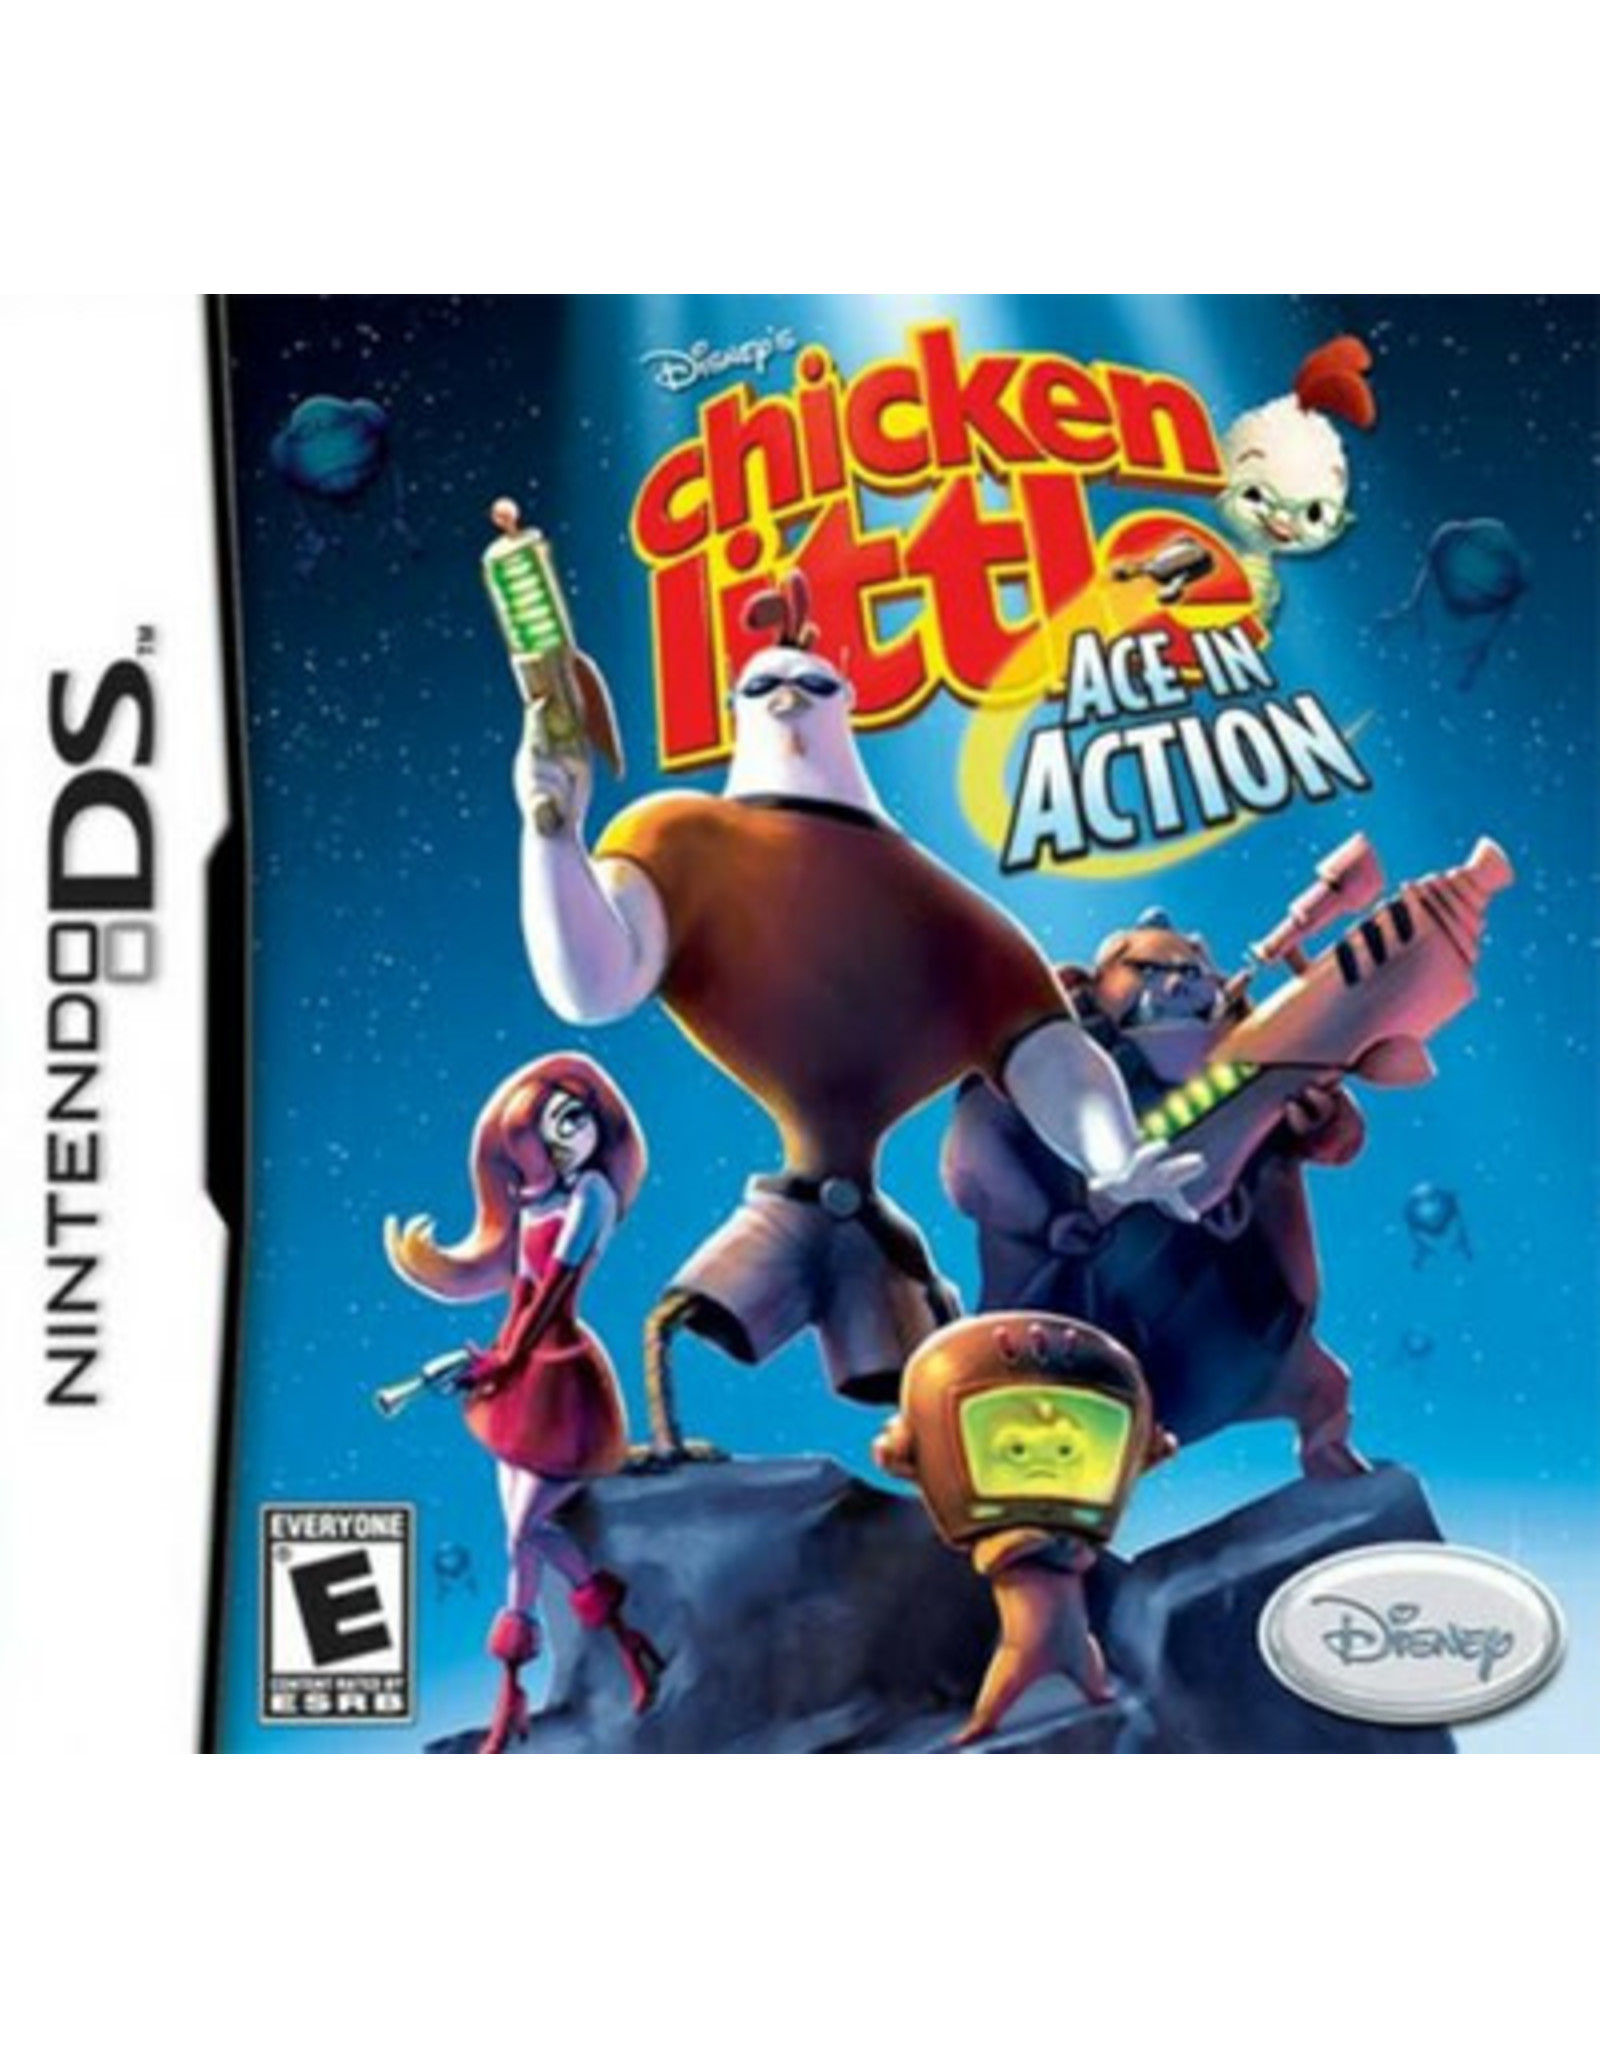 Nintendo DS Chicken Little Ace In Action (Cart Only)